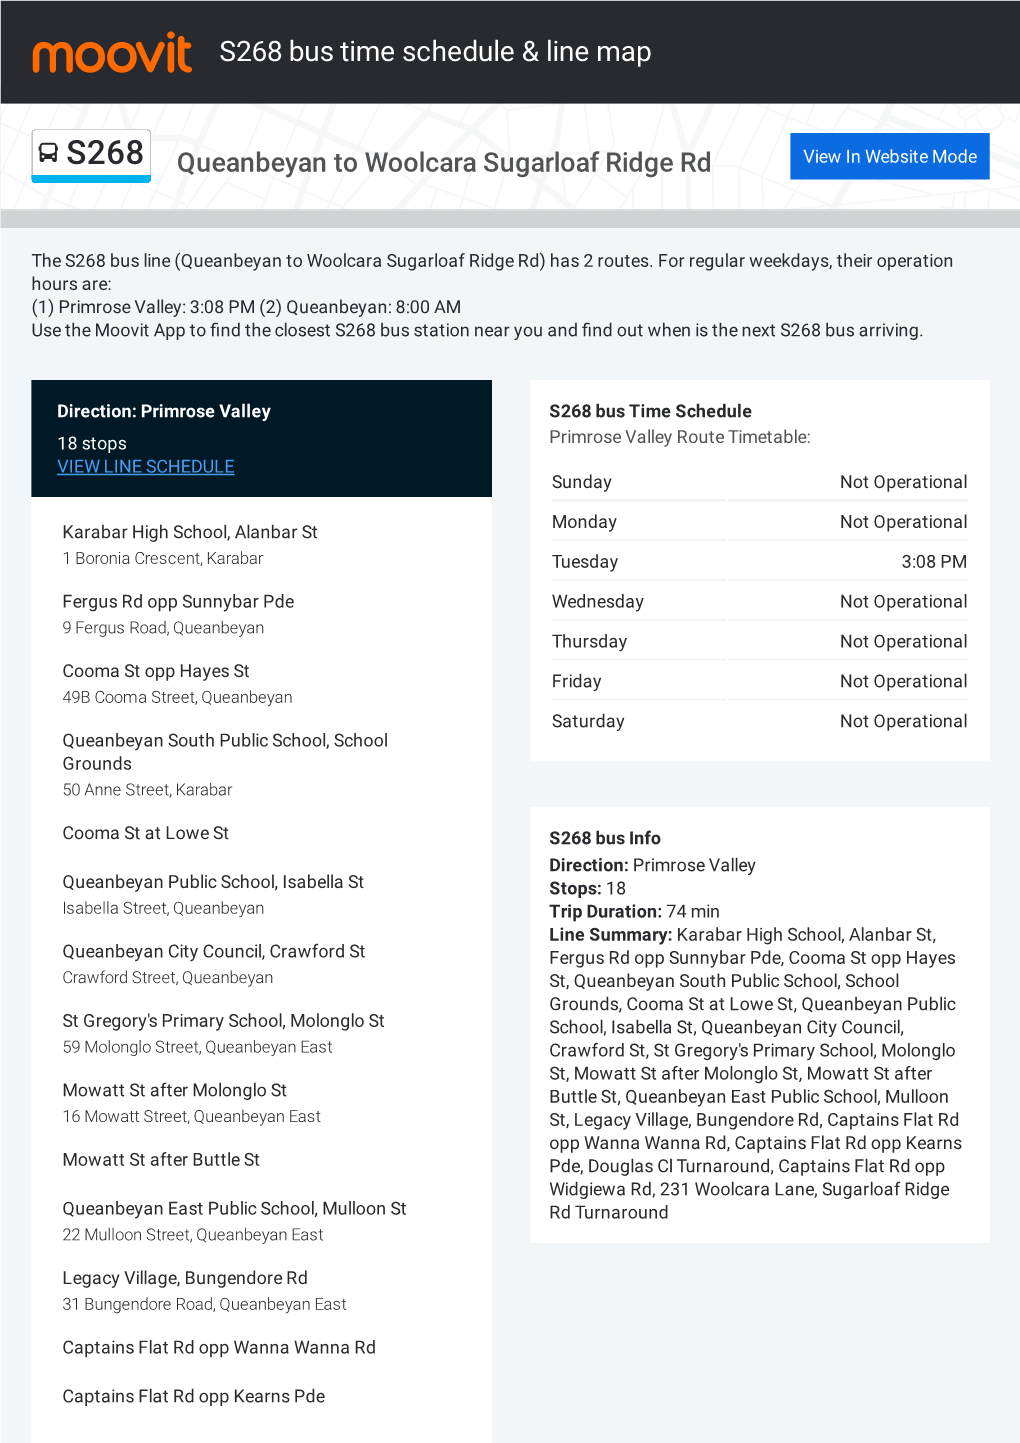 S268 Bus Time Schedule & Line Route